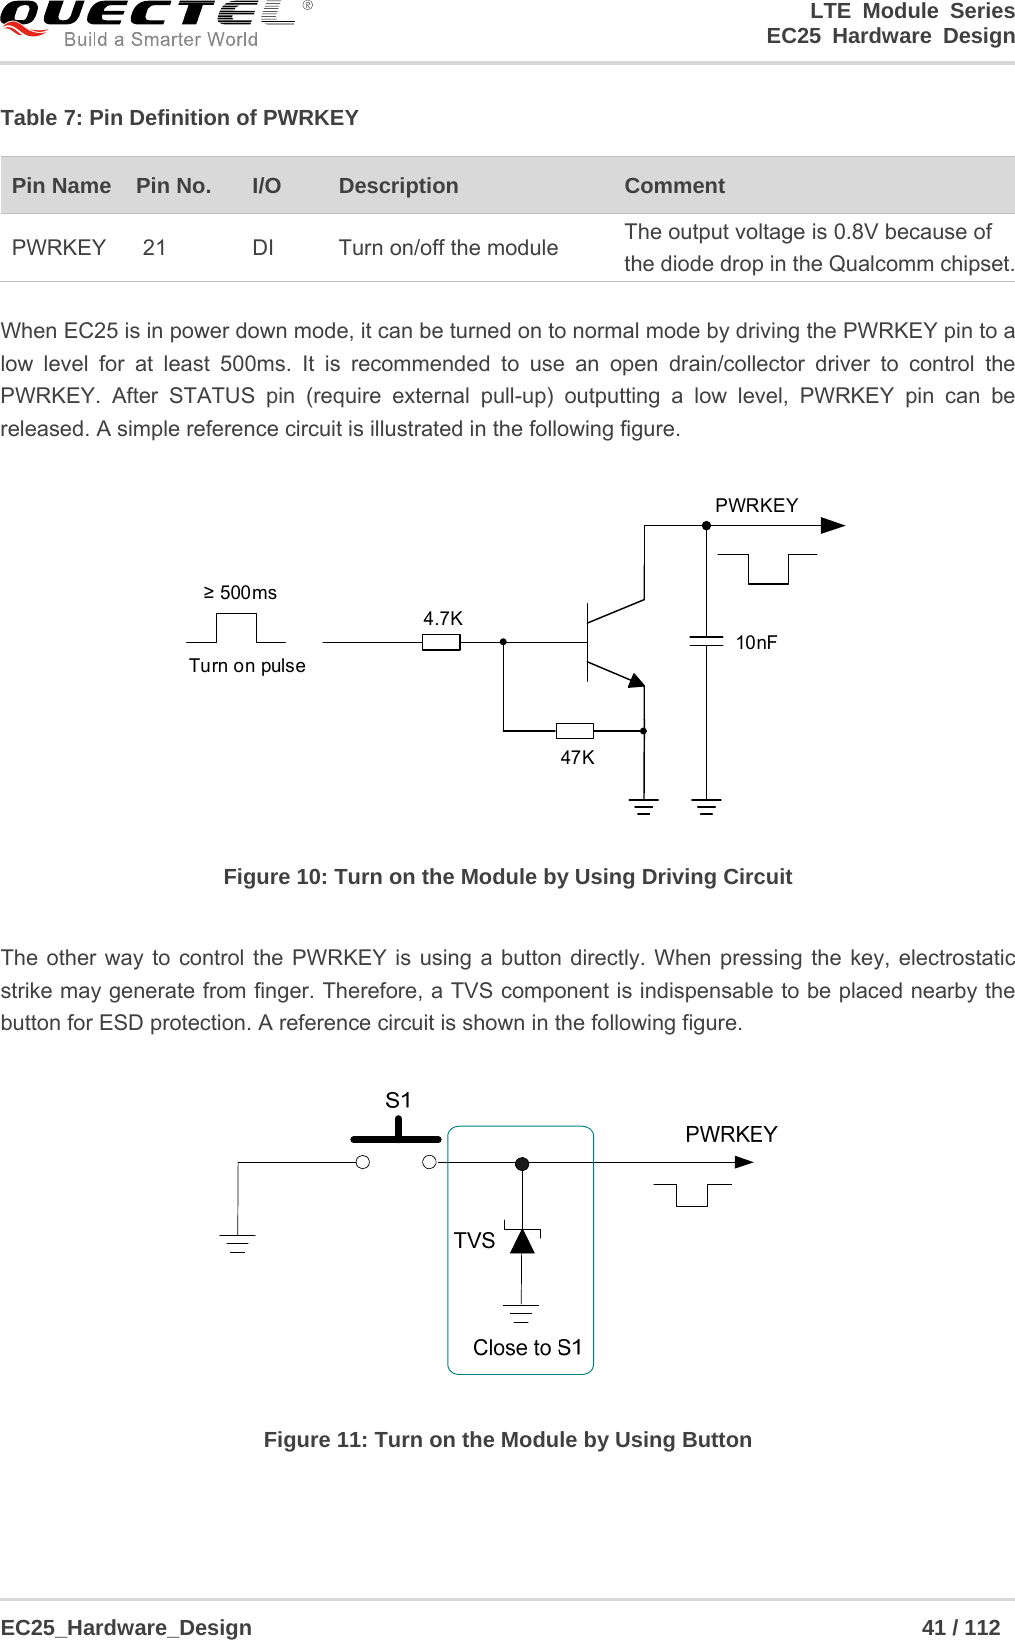 LTE Module Series                                                  EC25 Hardware Design  EC25_Hardware_Design                                                             41 / 112    Table 7: Pin Definition of PWRKEY  When EC25 is in power down mode, it can be turned on to normal mode by driving the PWRKEY pin to a low level for at least 500ms. It is recommended to use an open drain/collector driver to control the PWRKEY. After STATUS pin (require external pull-up) outputting a low level, PWRKEY pin can be released. A simple reference circuit is illustrated in the following figure. Turn on pulsePWRKEY4.7K47K≥ 500ms10nF Figure 10: Turn on the Module by Using Driving Circuit  The other way to control the PWRKEY is using a button directly. When pressing the key, electrostatic strike may generate from finger. Therefore, a TVS component is indispensable to be placed nearby the button for ESD protection. A reference circuit is shown in the following figure.  Figure 11: Turn on the Module by Using Button   Pin Name    Pin No.  I/O  Description  Comment PWRKEY  21  DI  Turn on/off the module  The output voltage is 0.8V because of the diode drop in the Qualcomm chipset.